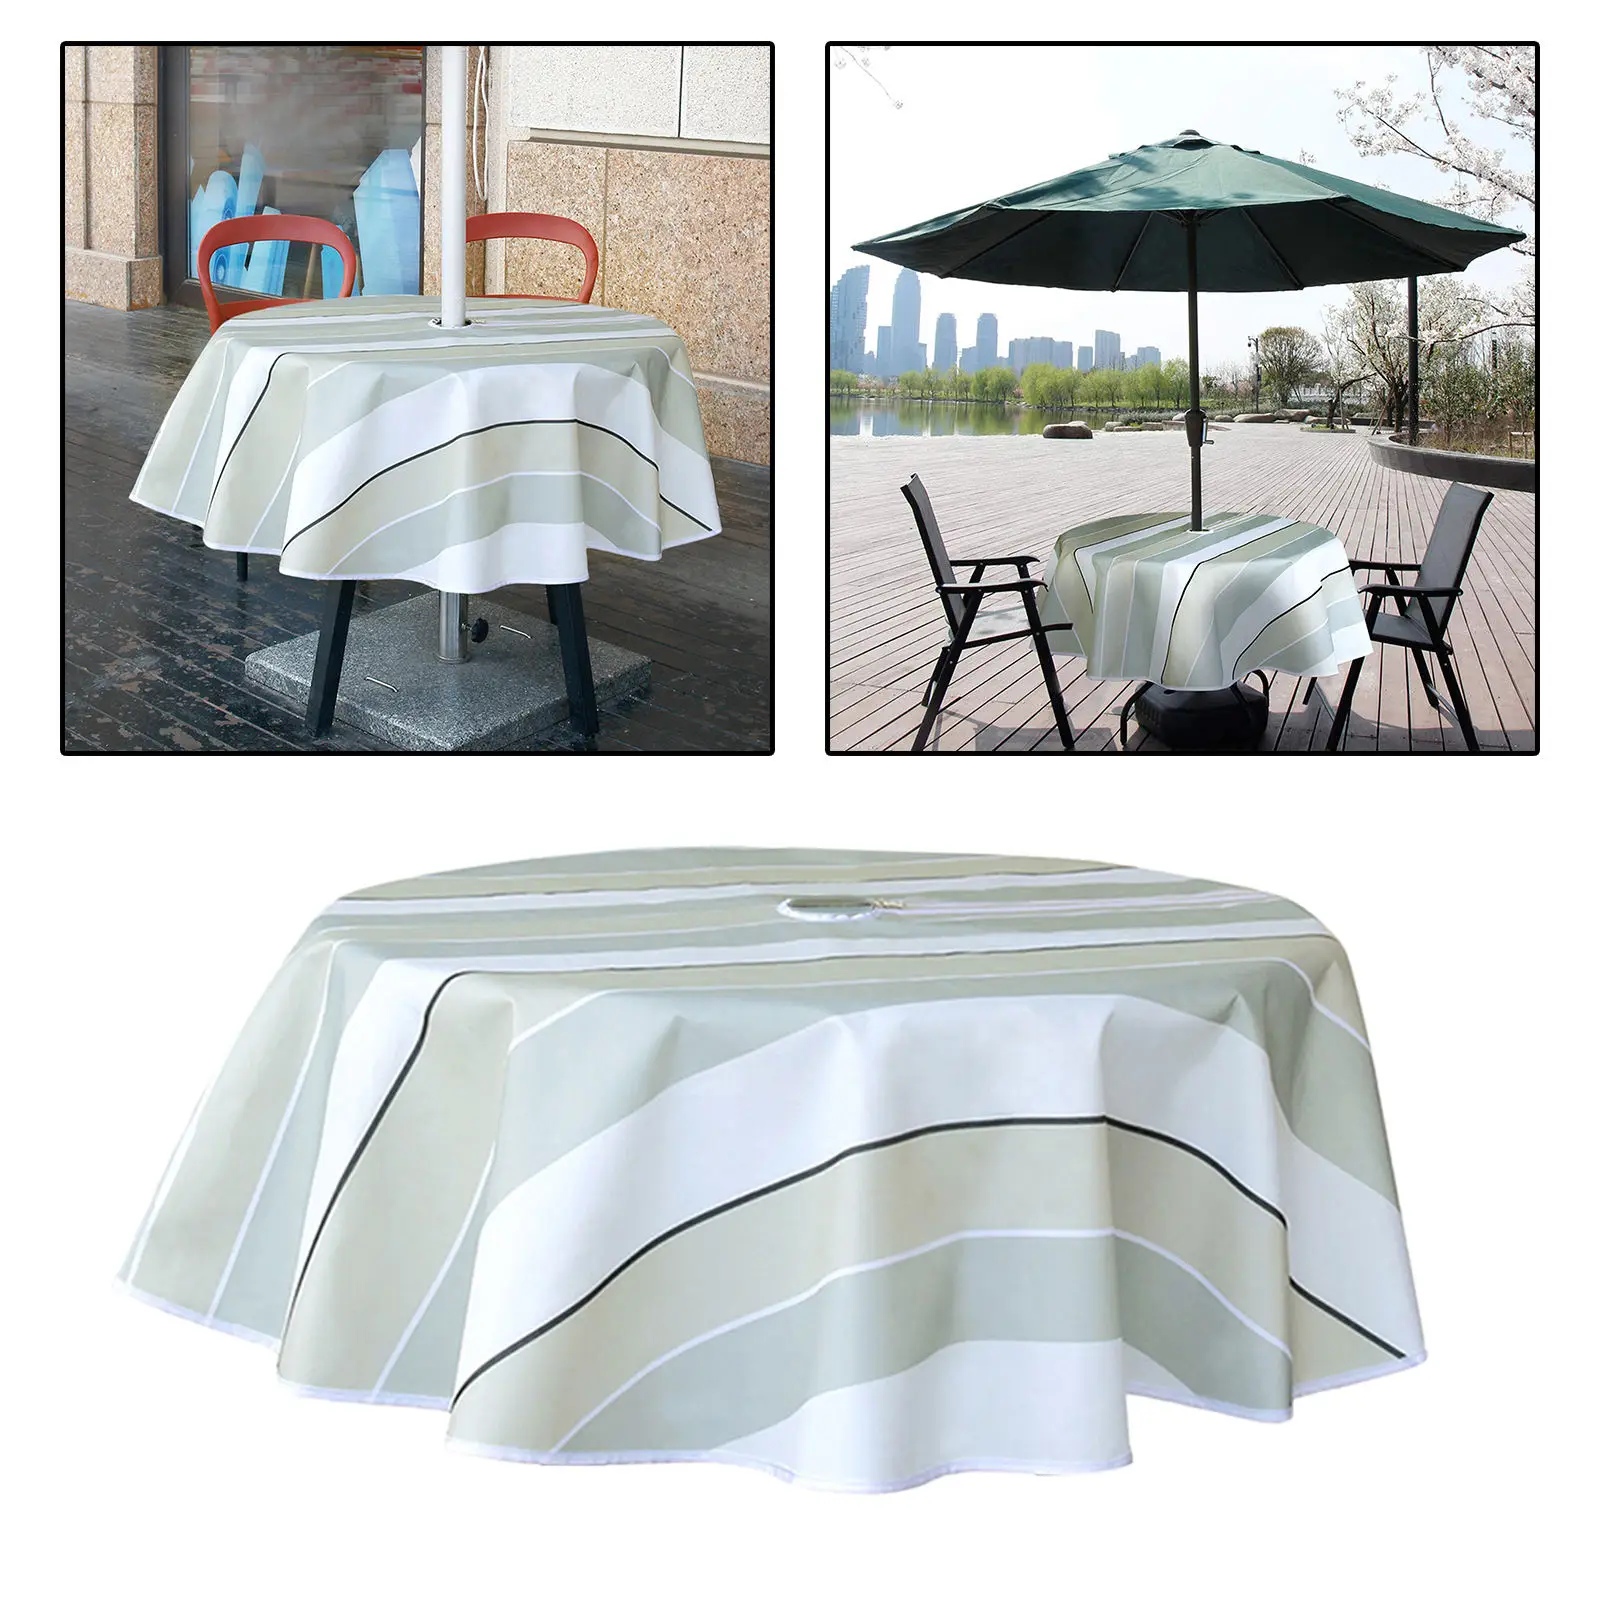 Waterproof Oilproof Polyester Zippered Fitted Outdoor Patio Table Cloth w/ Umbrella Hole Coffee Table Cover for Garden Parties